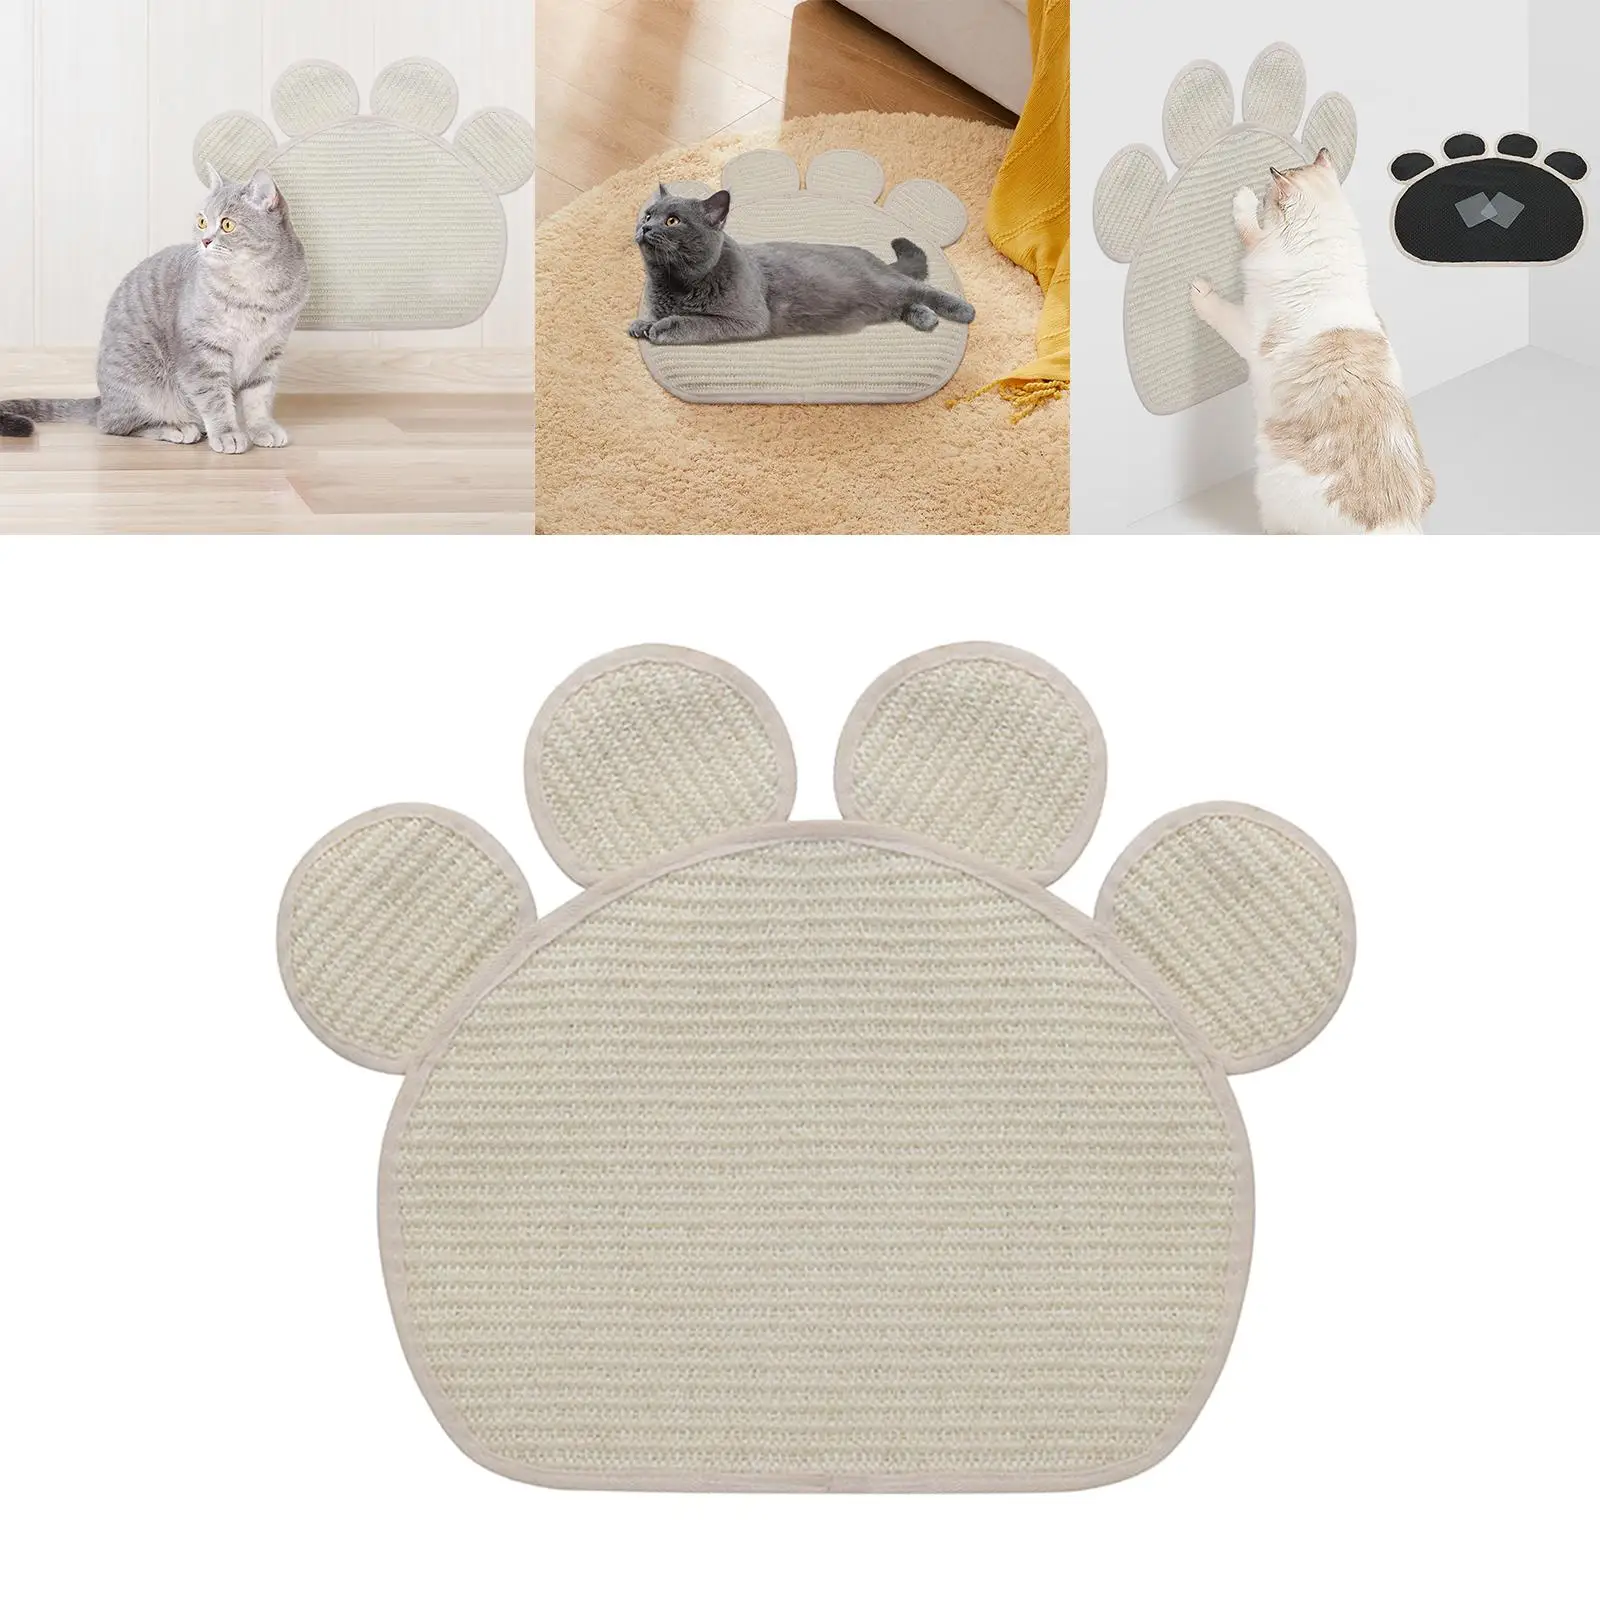 Cat Scratcher Mat Grinding Claws Sisal Fabric Protecting Kitty Scratching Pad Furniture Protector Carpet for Floor Couch